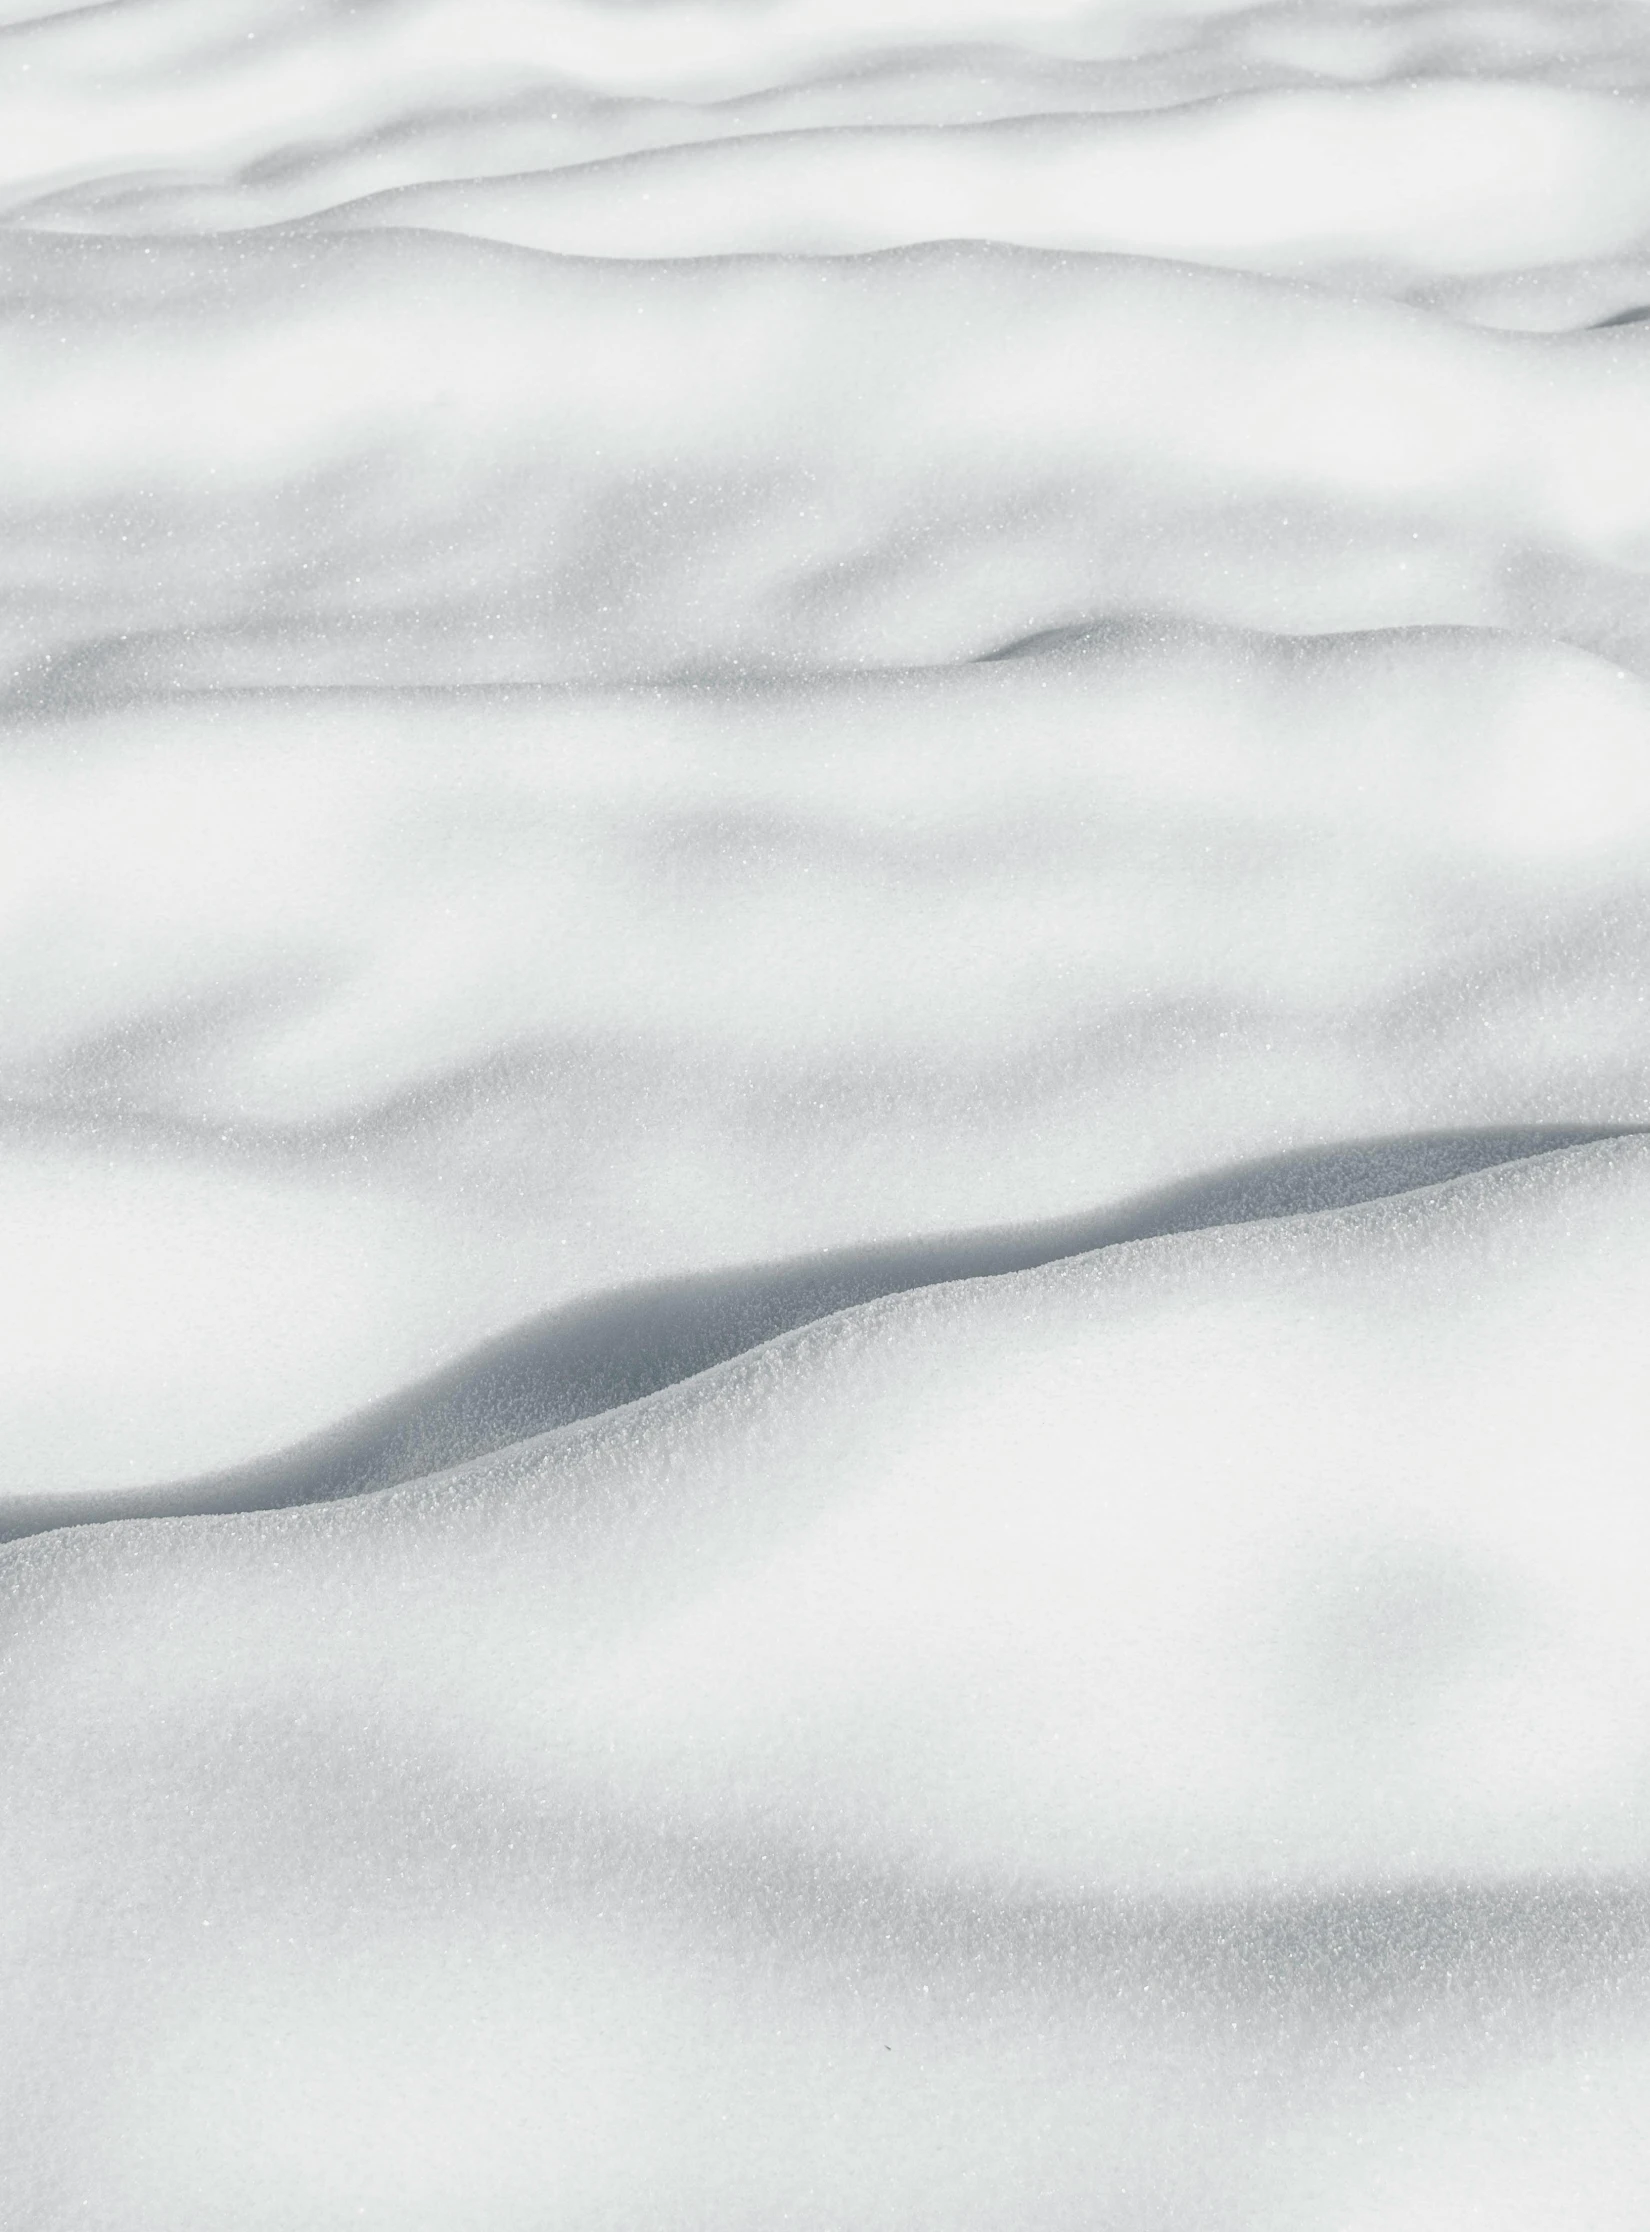 large white expanse of snow with a patch of grass